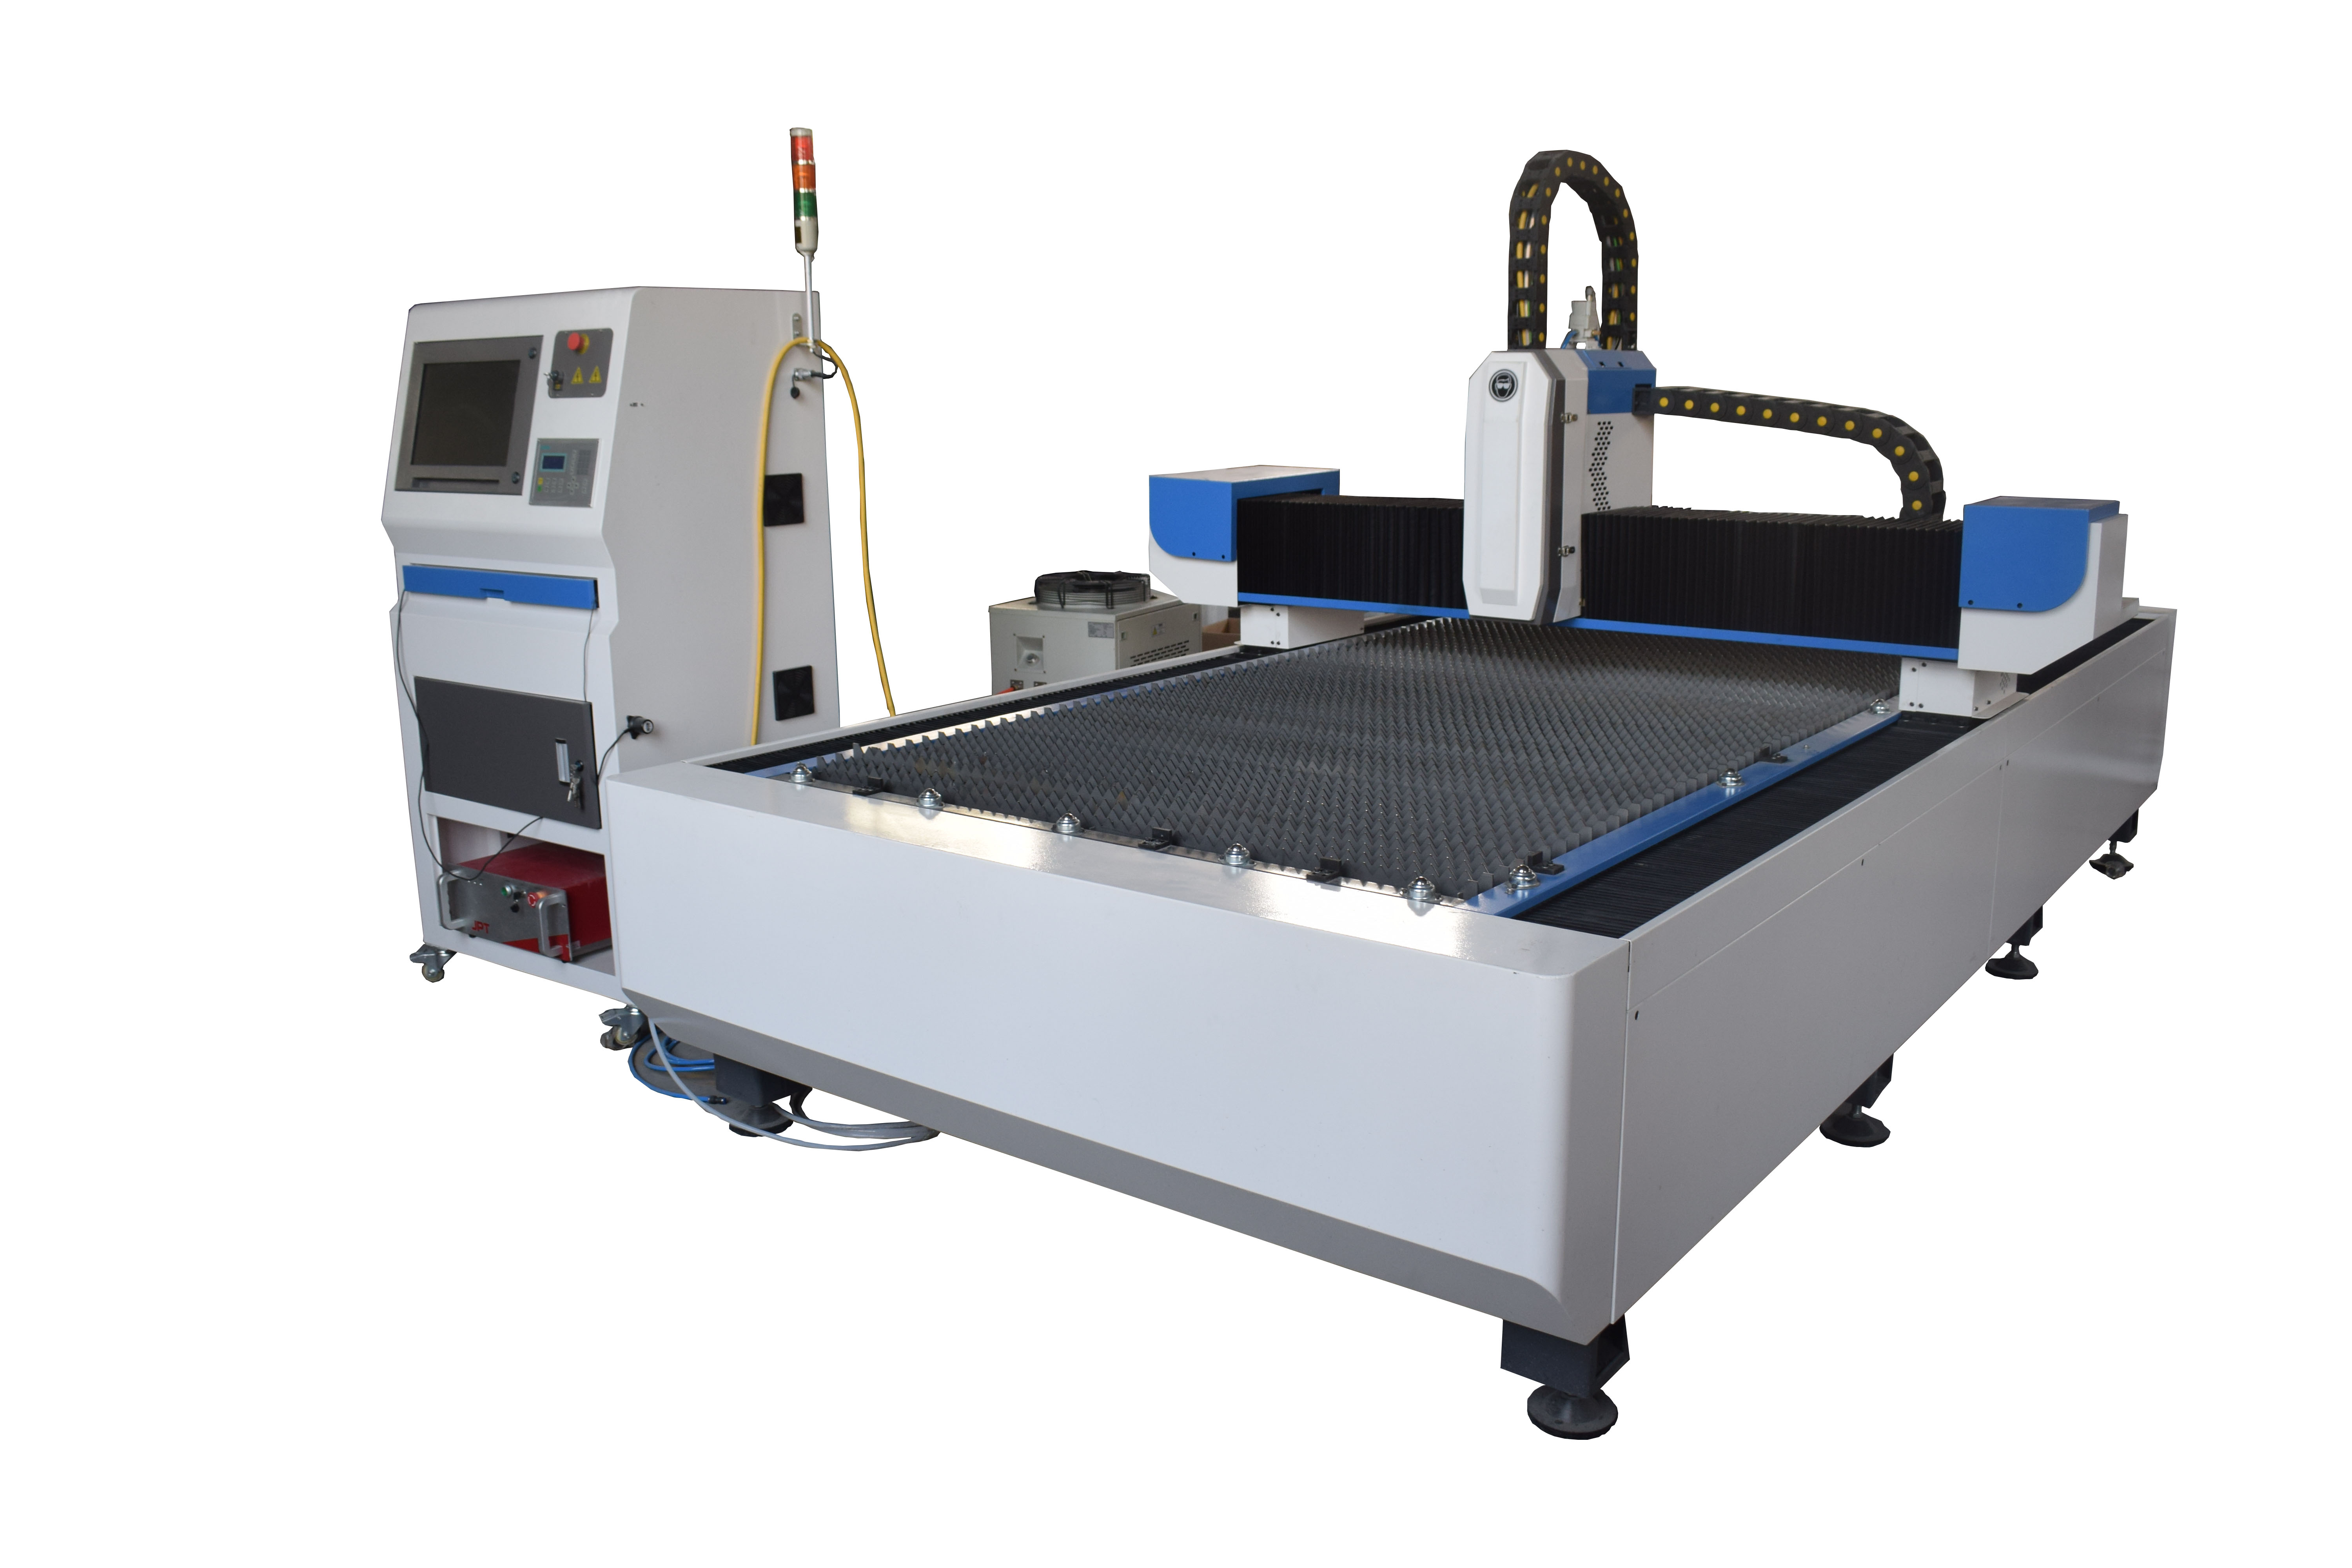 China Manufacturer for Laser Cutting Table For Steel - 2000W 3000W Aluminum Steel Metal Fiber Laser Cutting Machine – Apex